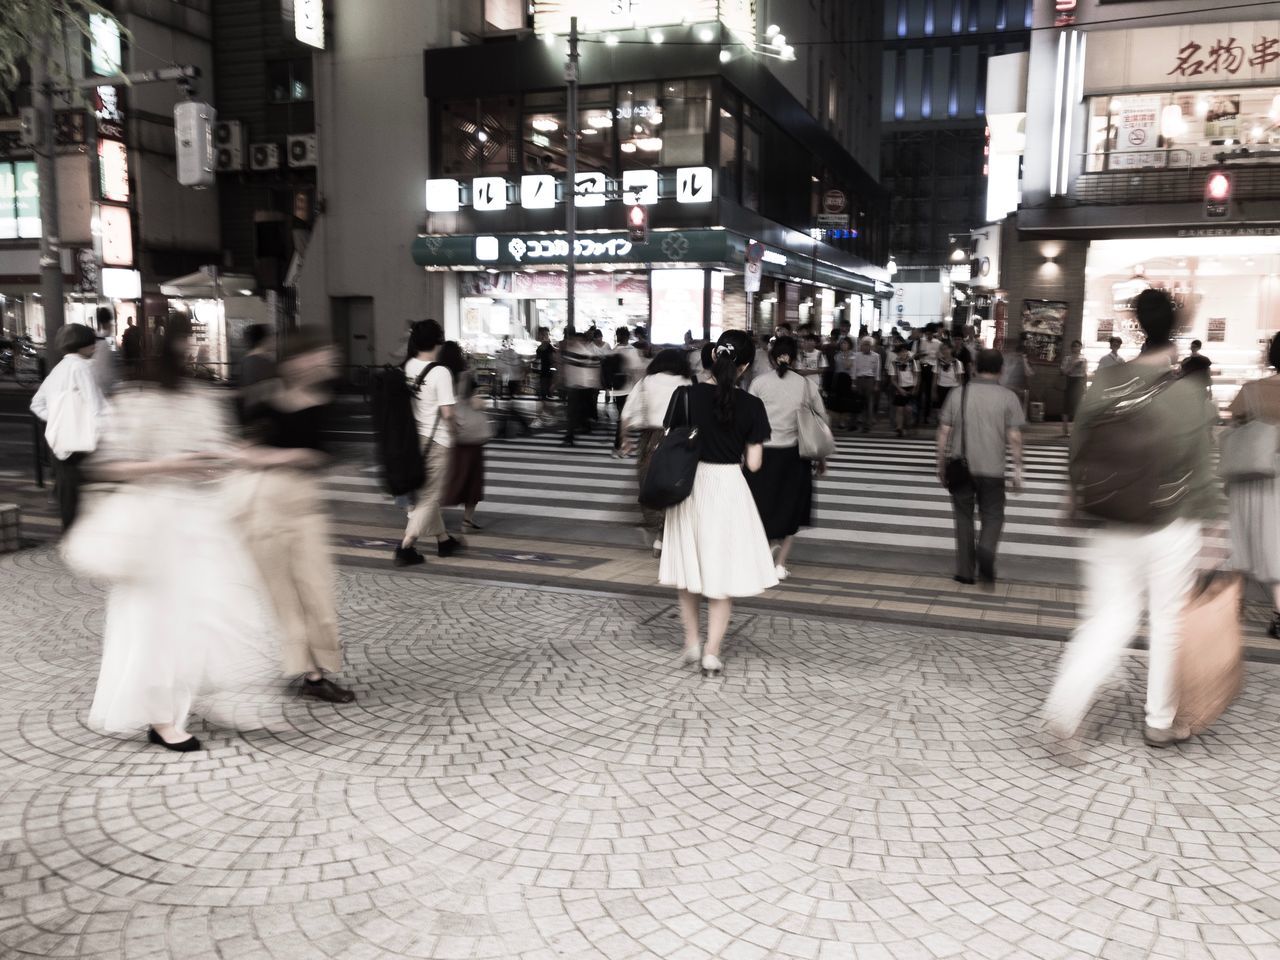 blurred motion, motion, city, group of people, architecture, walking, crowd, city life, transportation, women, street, real people, large group of people, adult, built structure, building exterior, speed, men, on the move, crossing, outdoors, busy